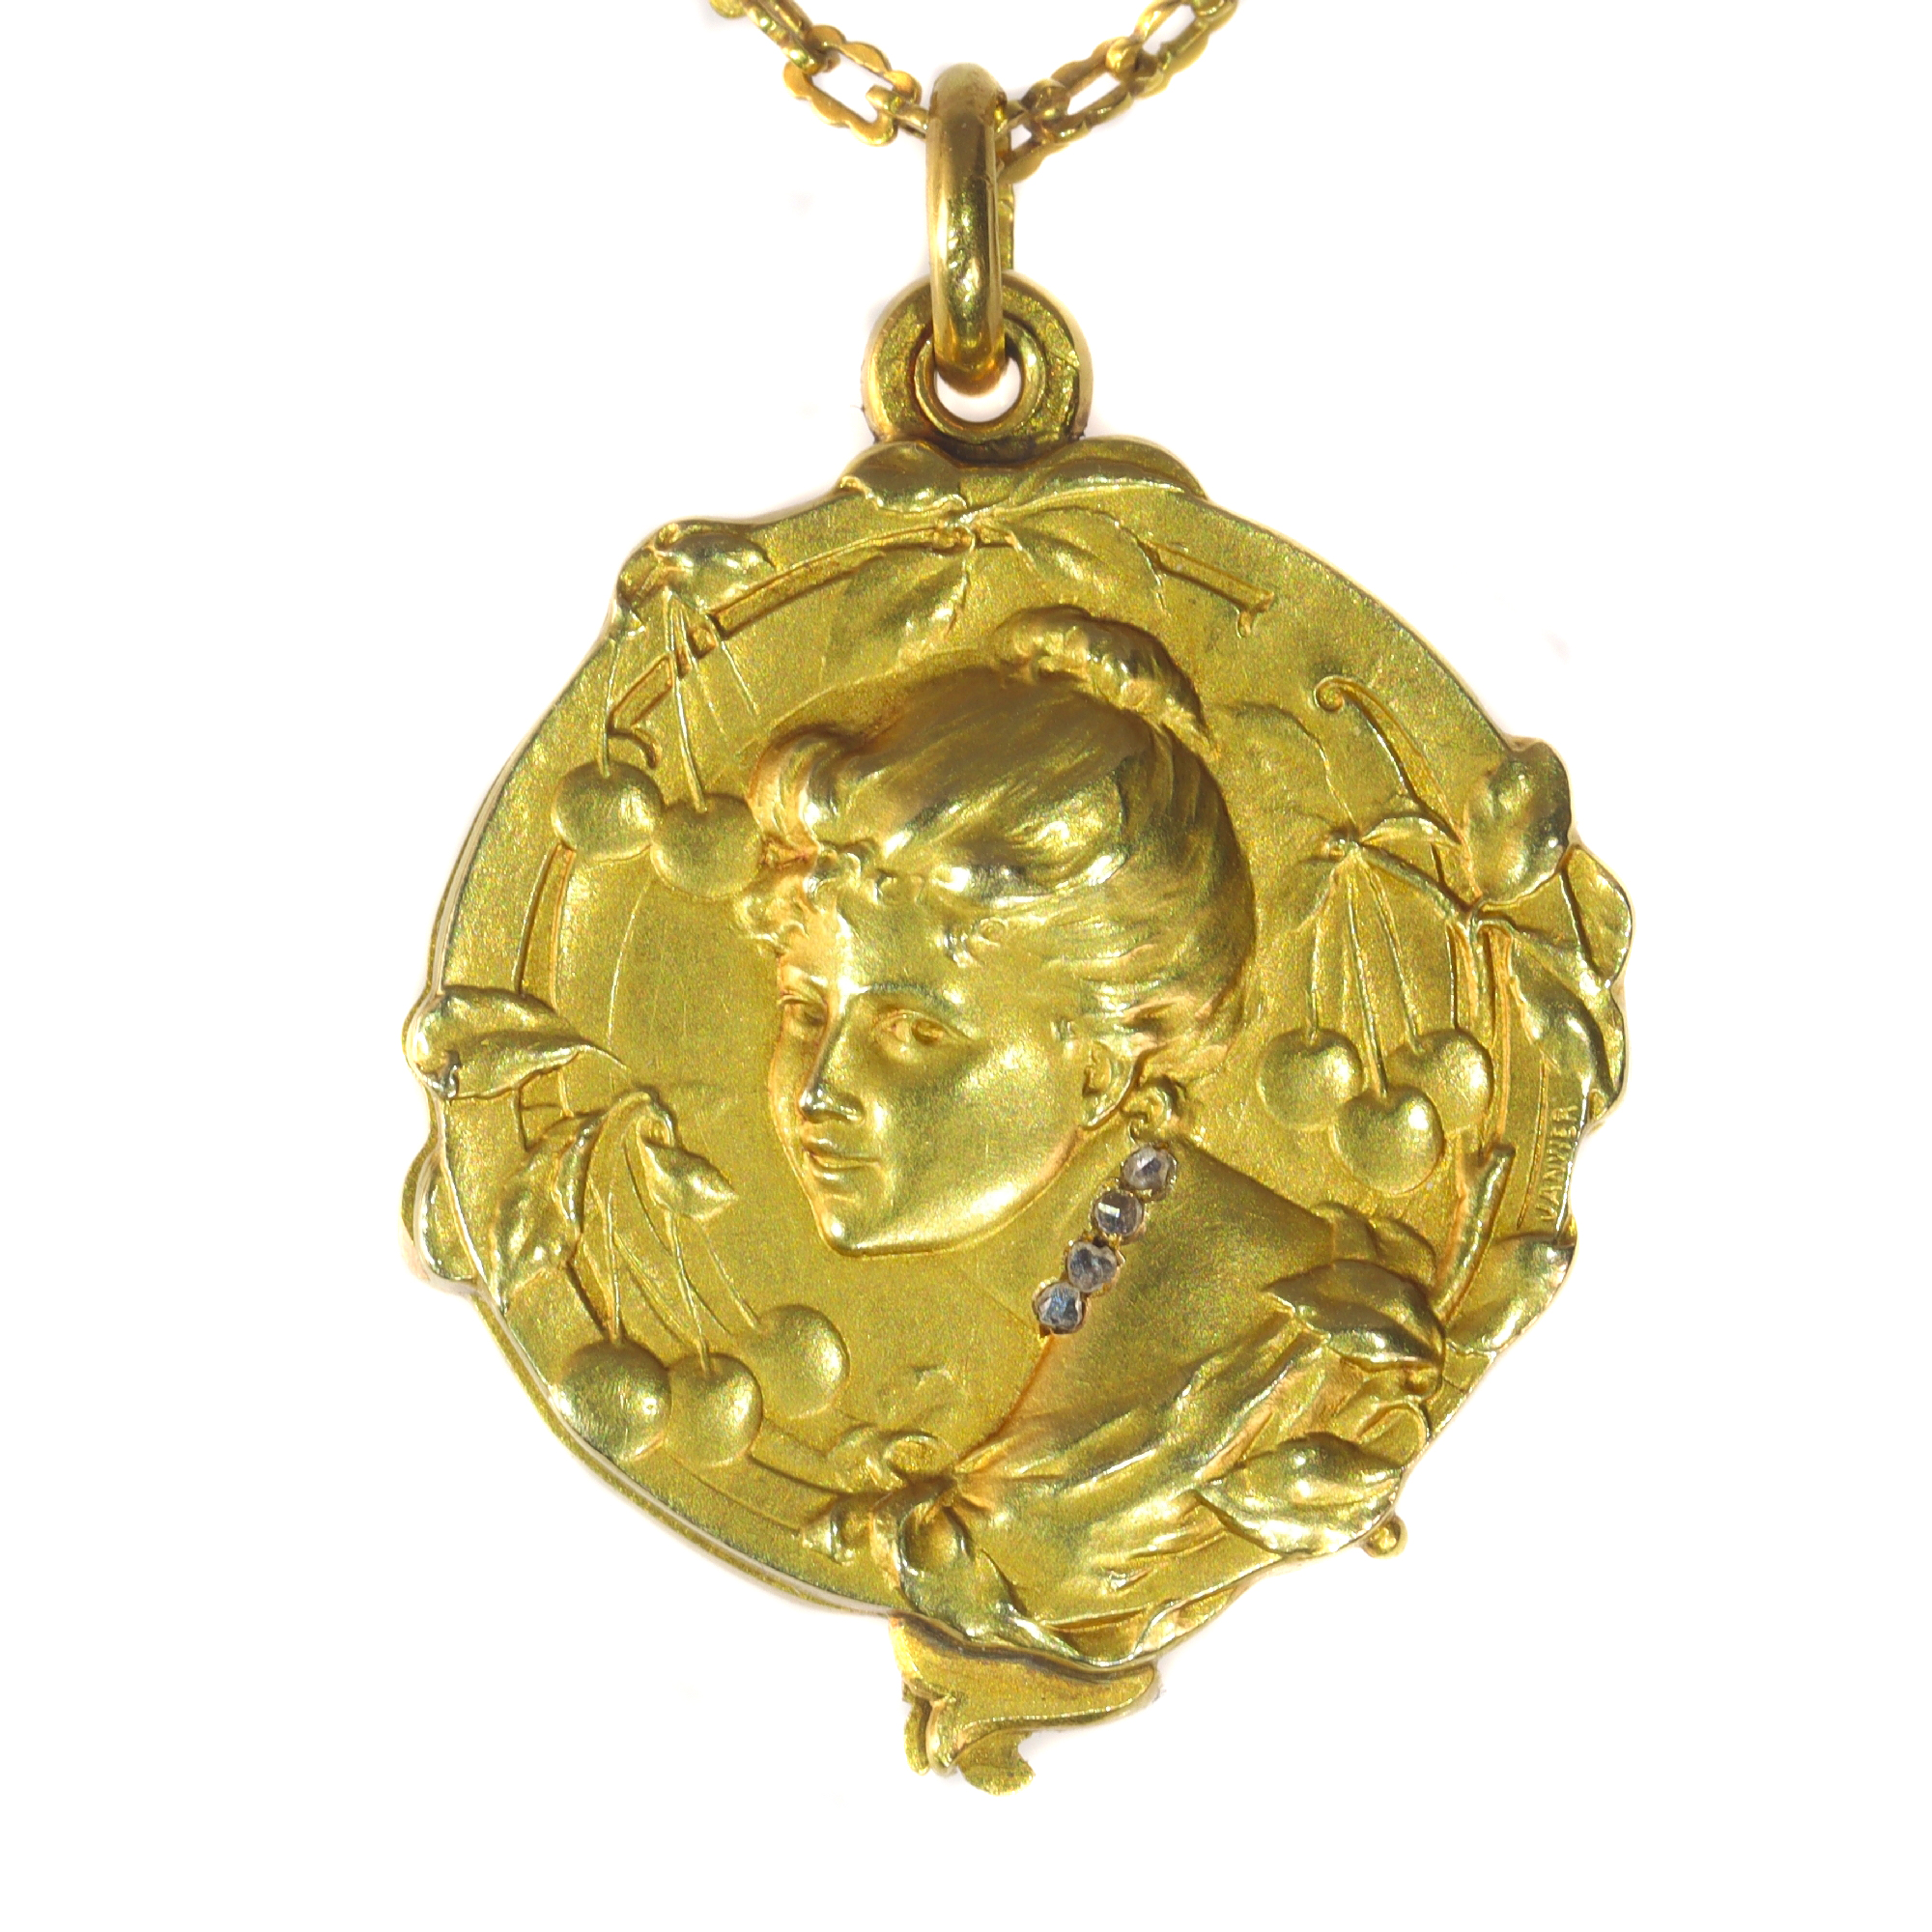 Janvier's Legacy: A 19th Century French Gold Locket